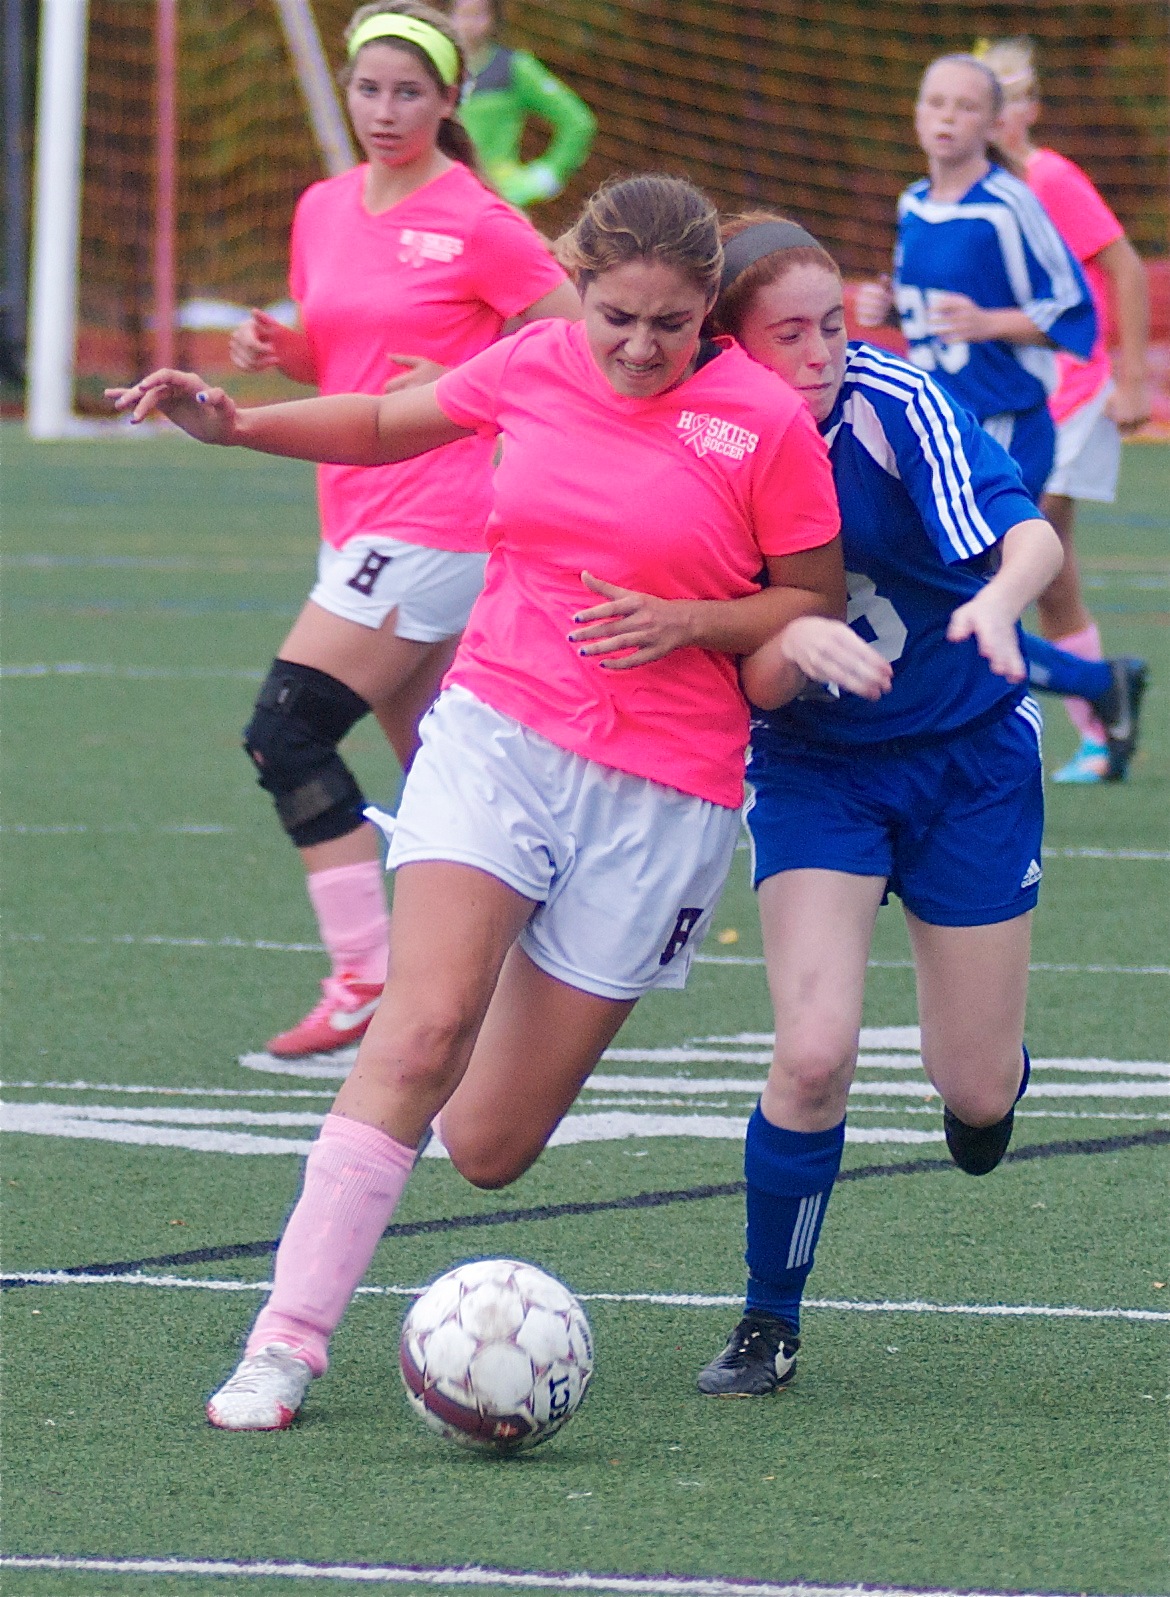 Jessica Scazzero of Harrison (L) uses her body to block out Pearl River defender.